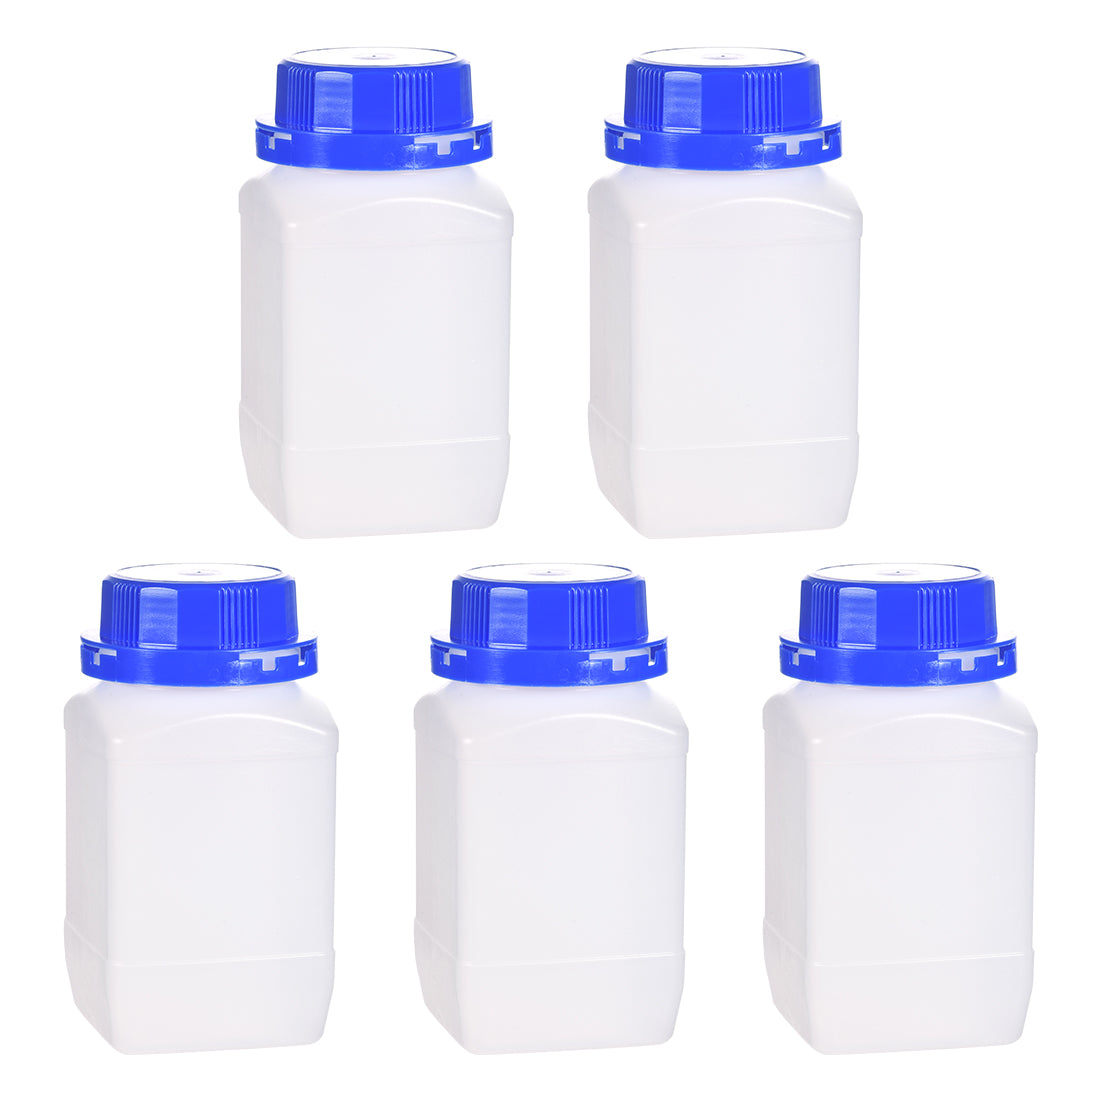 uxcell Uxcell Plastic Lab Chemical Reagent Bottle, 500ml/ 16.9 oz Wide Mouth Sample Sealing Liquid/Solid Storage Bottles, Blue 5pcs